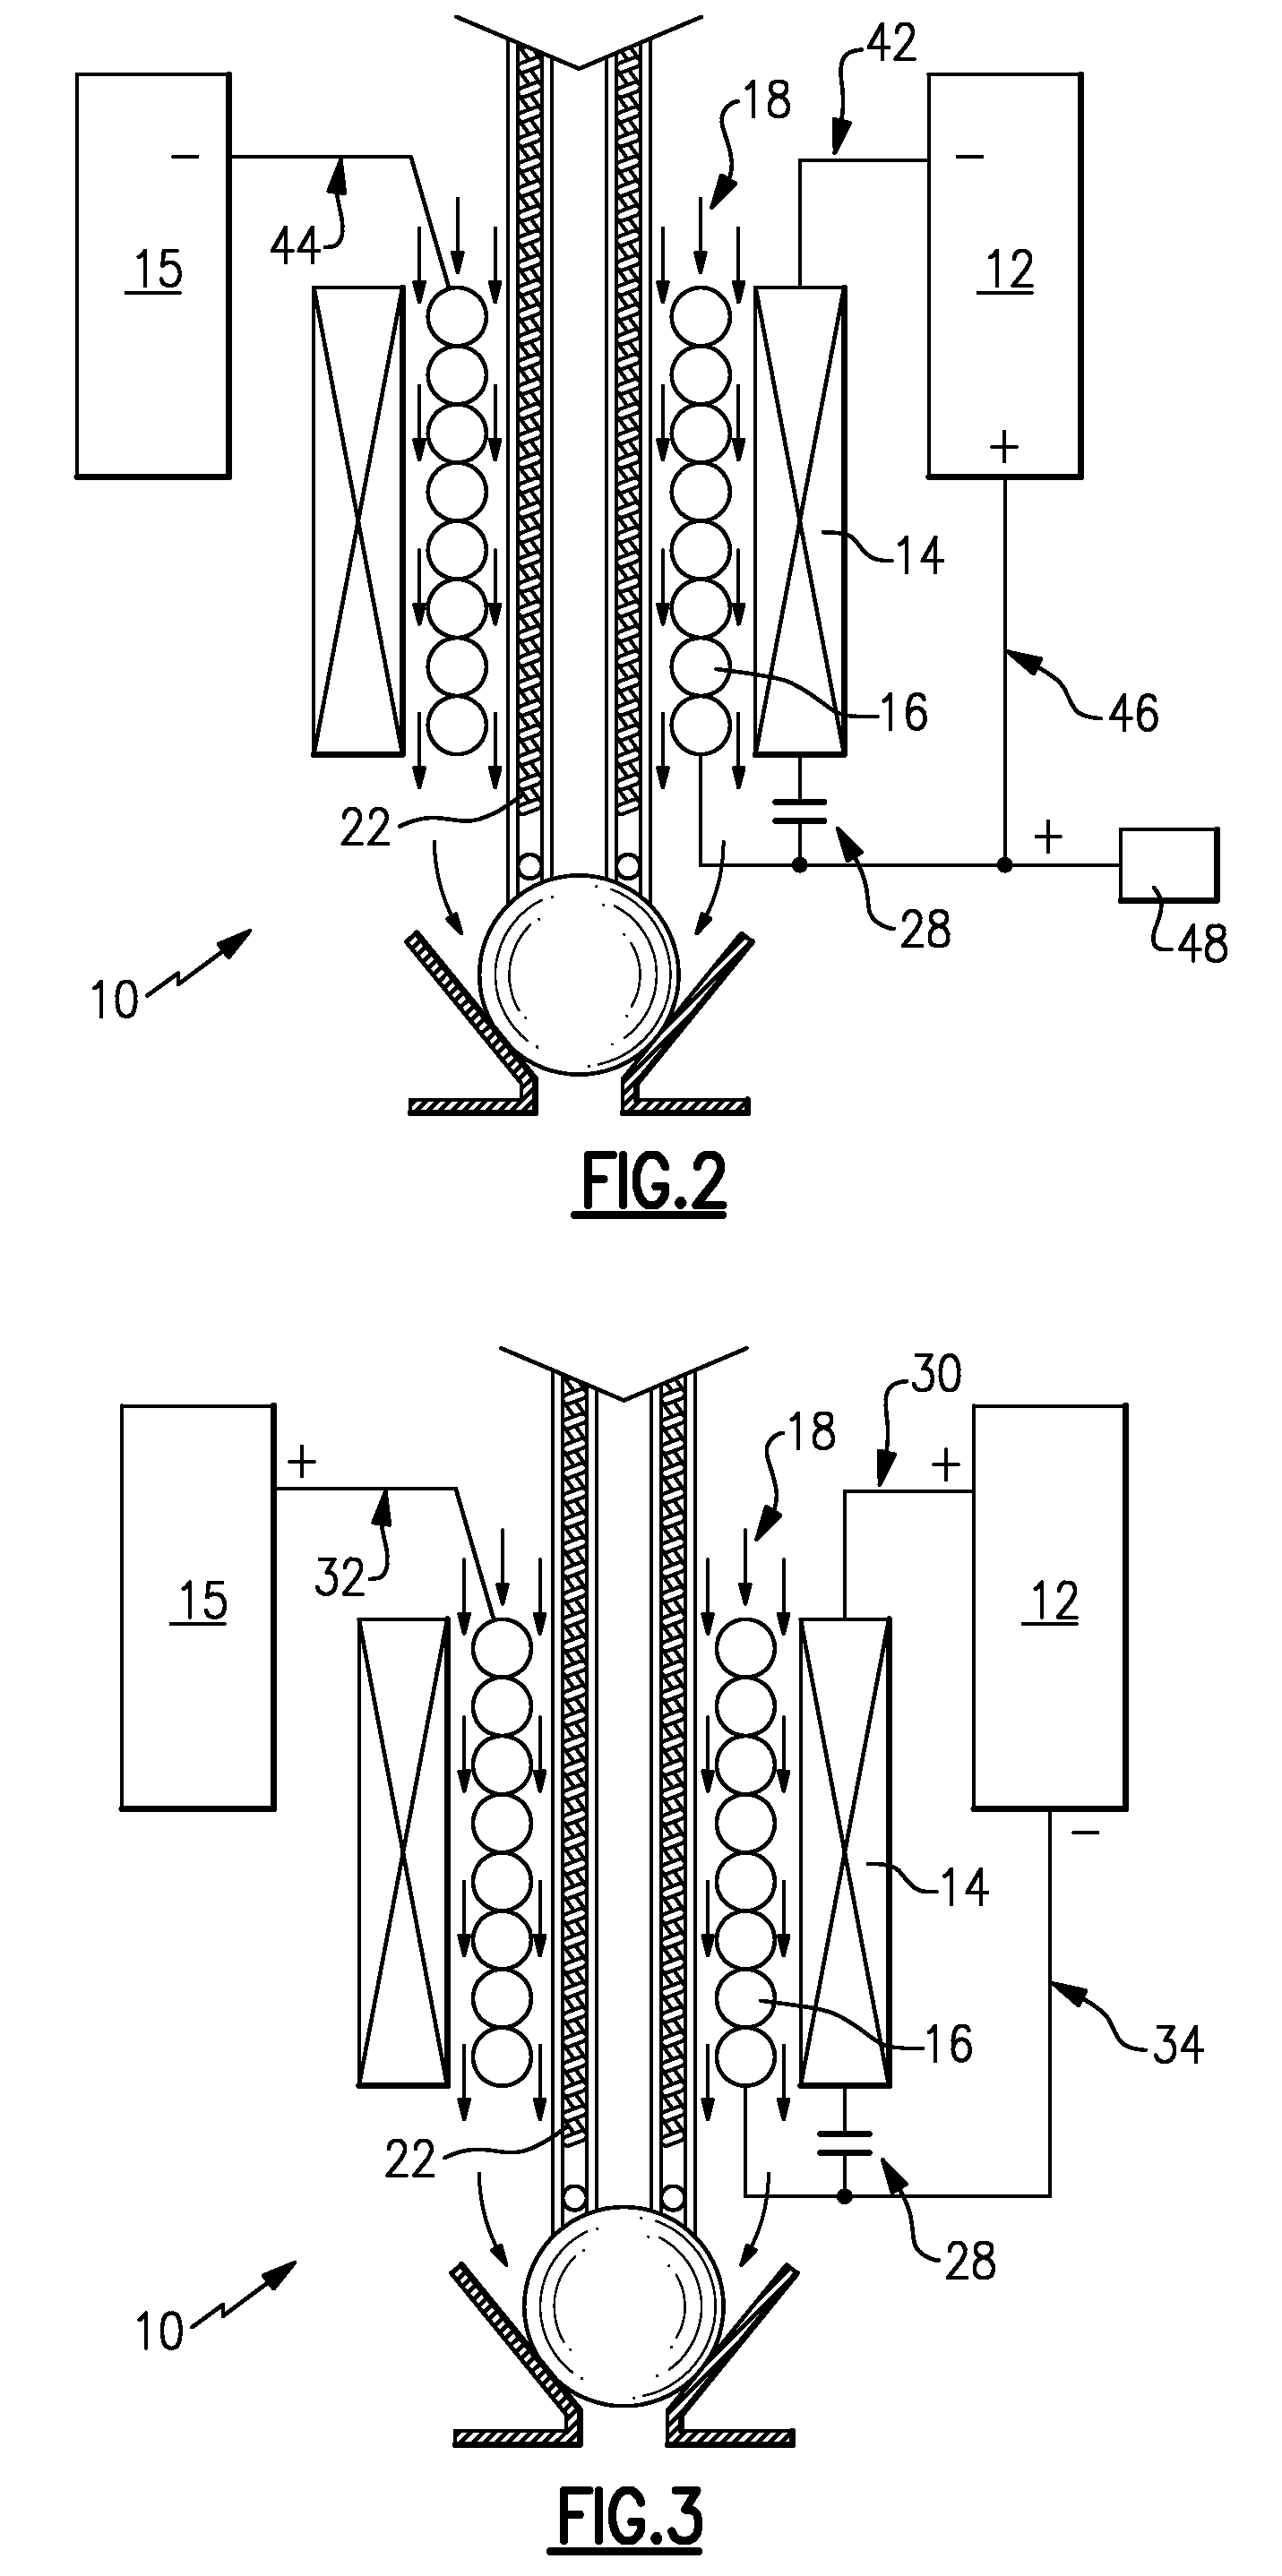 Inductive heated injector using a three wire connection